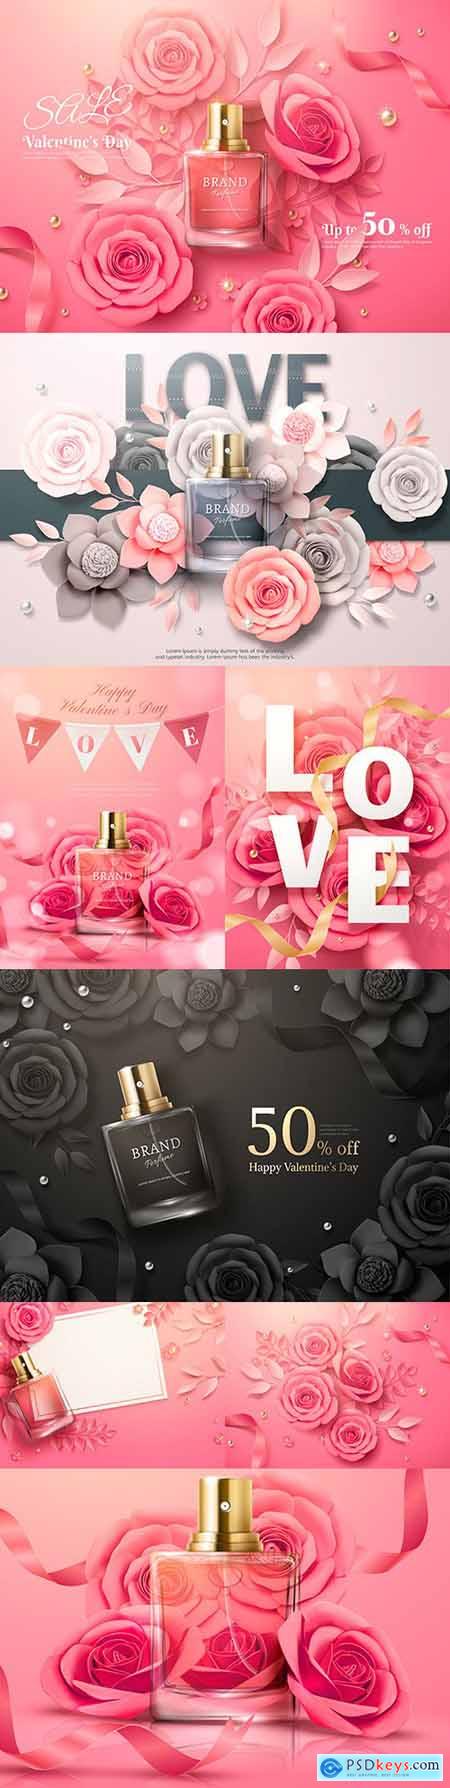 Perfume advertising with pink paper colors 3d illustrations